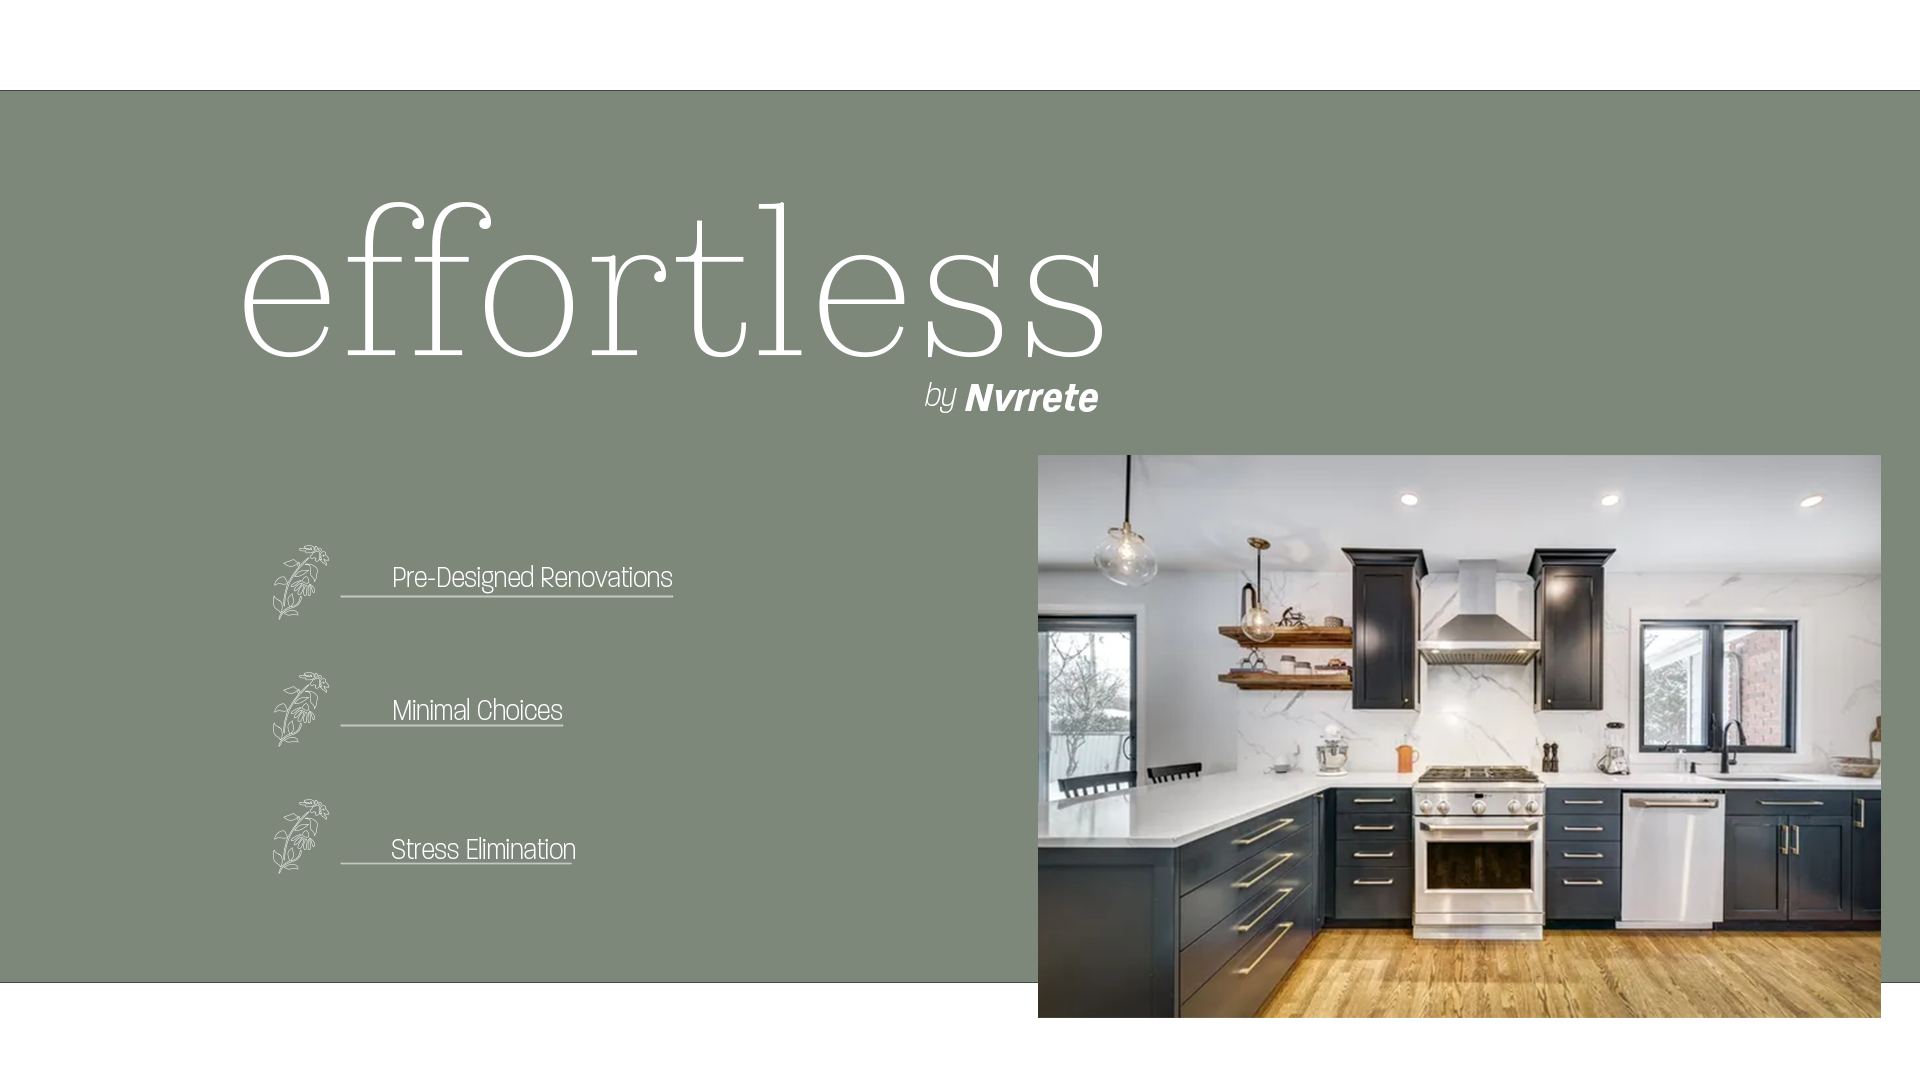 the word effortless is on a green background with a picture of a kitchen nvrrete